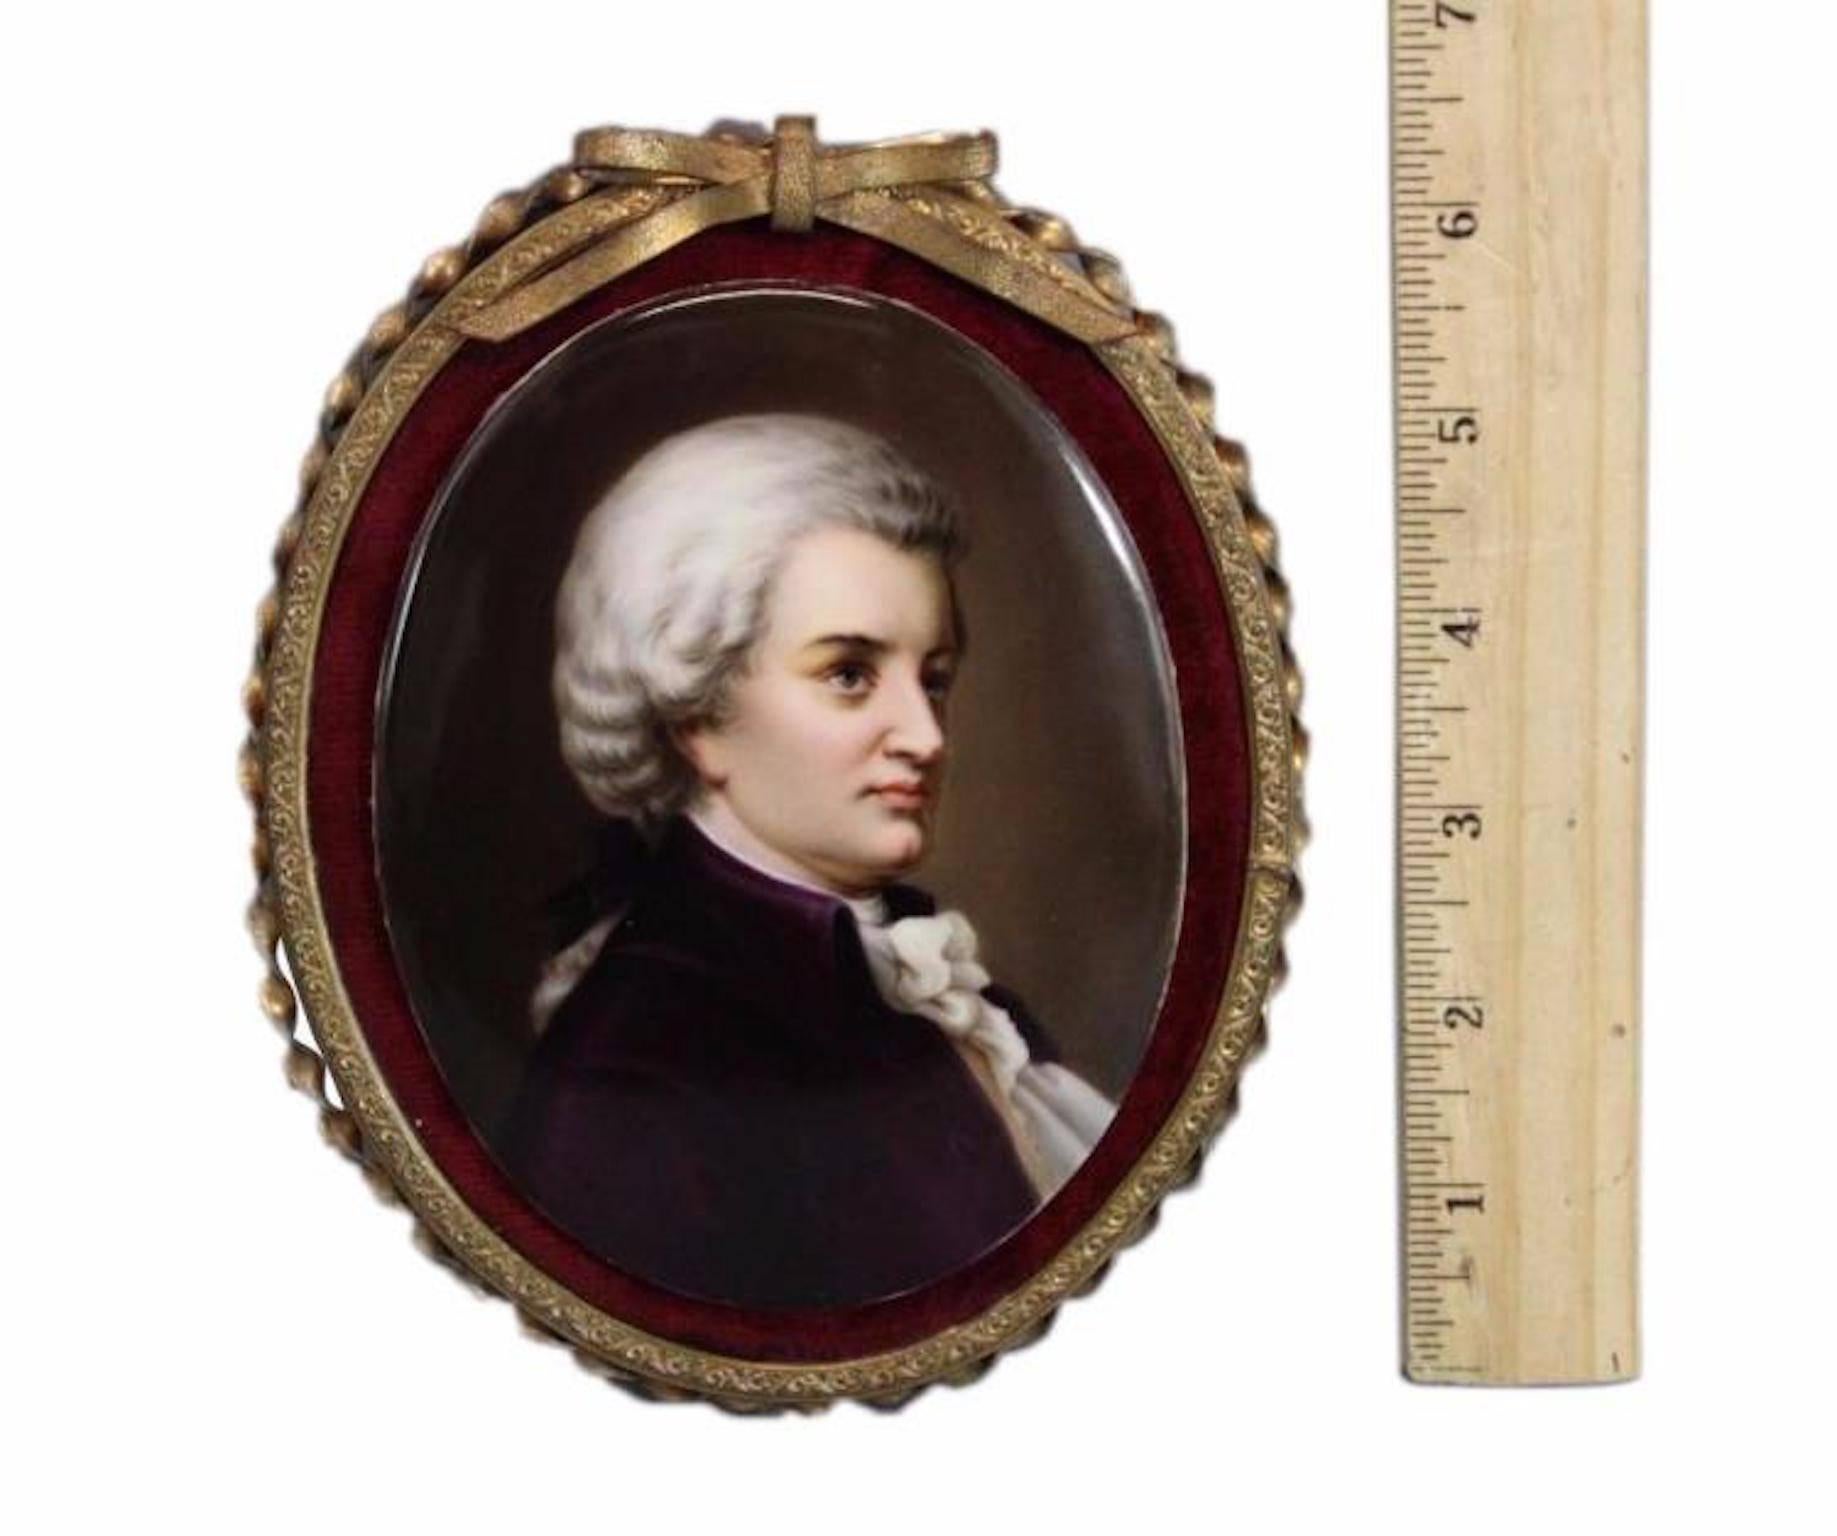 19th century Continental miniature porcelain portrait of an 18th century gentleman with powdered wig. Ornate velvet lined frame.